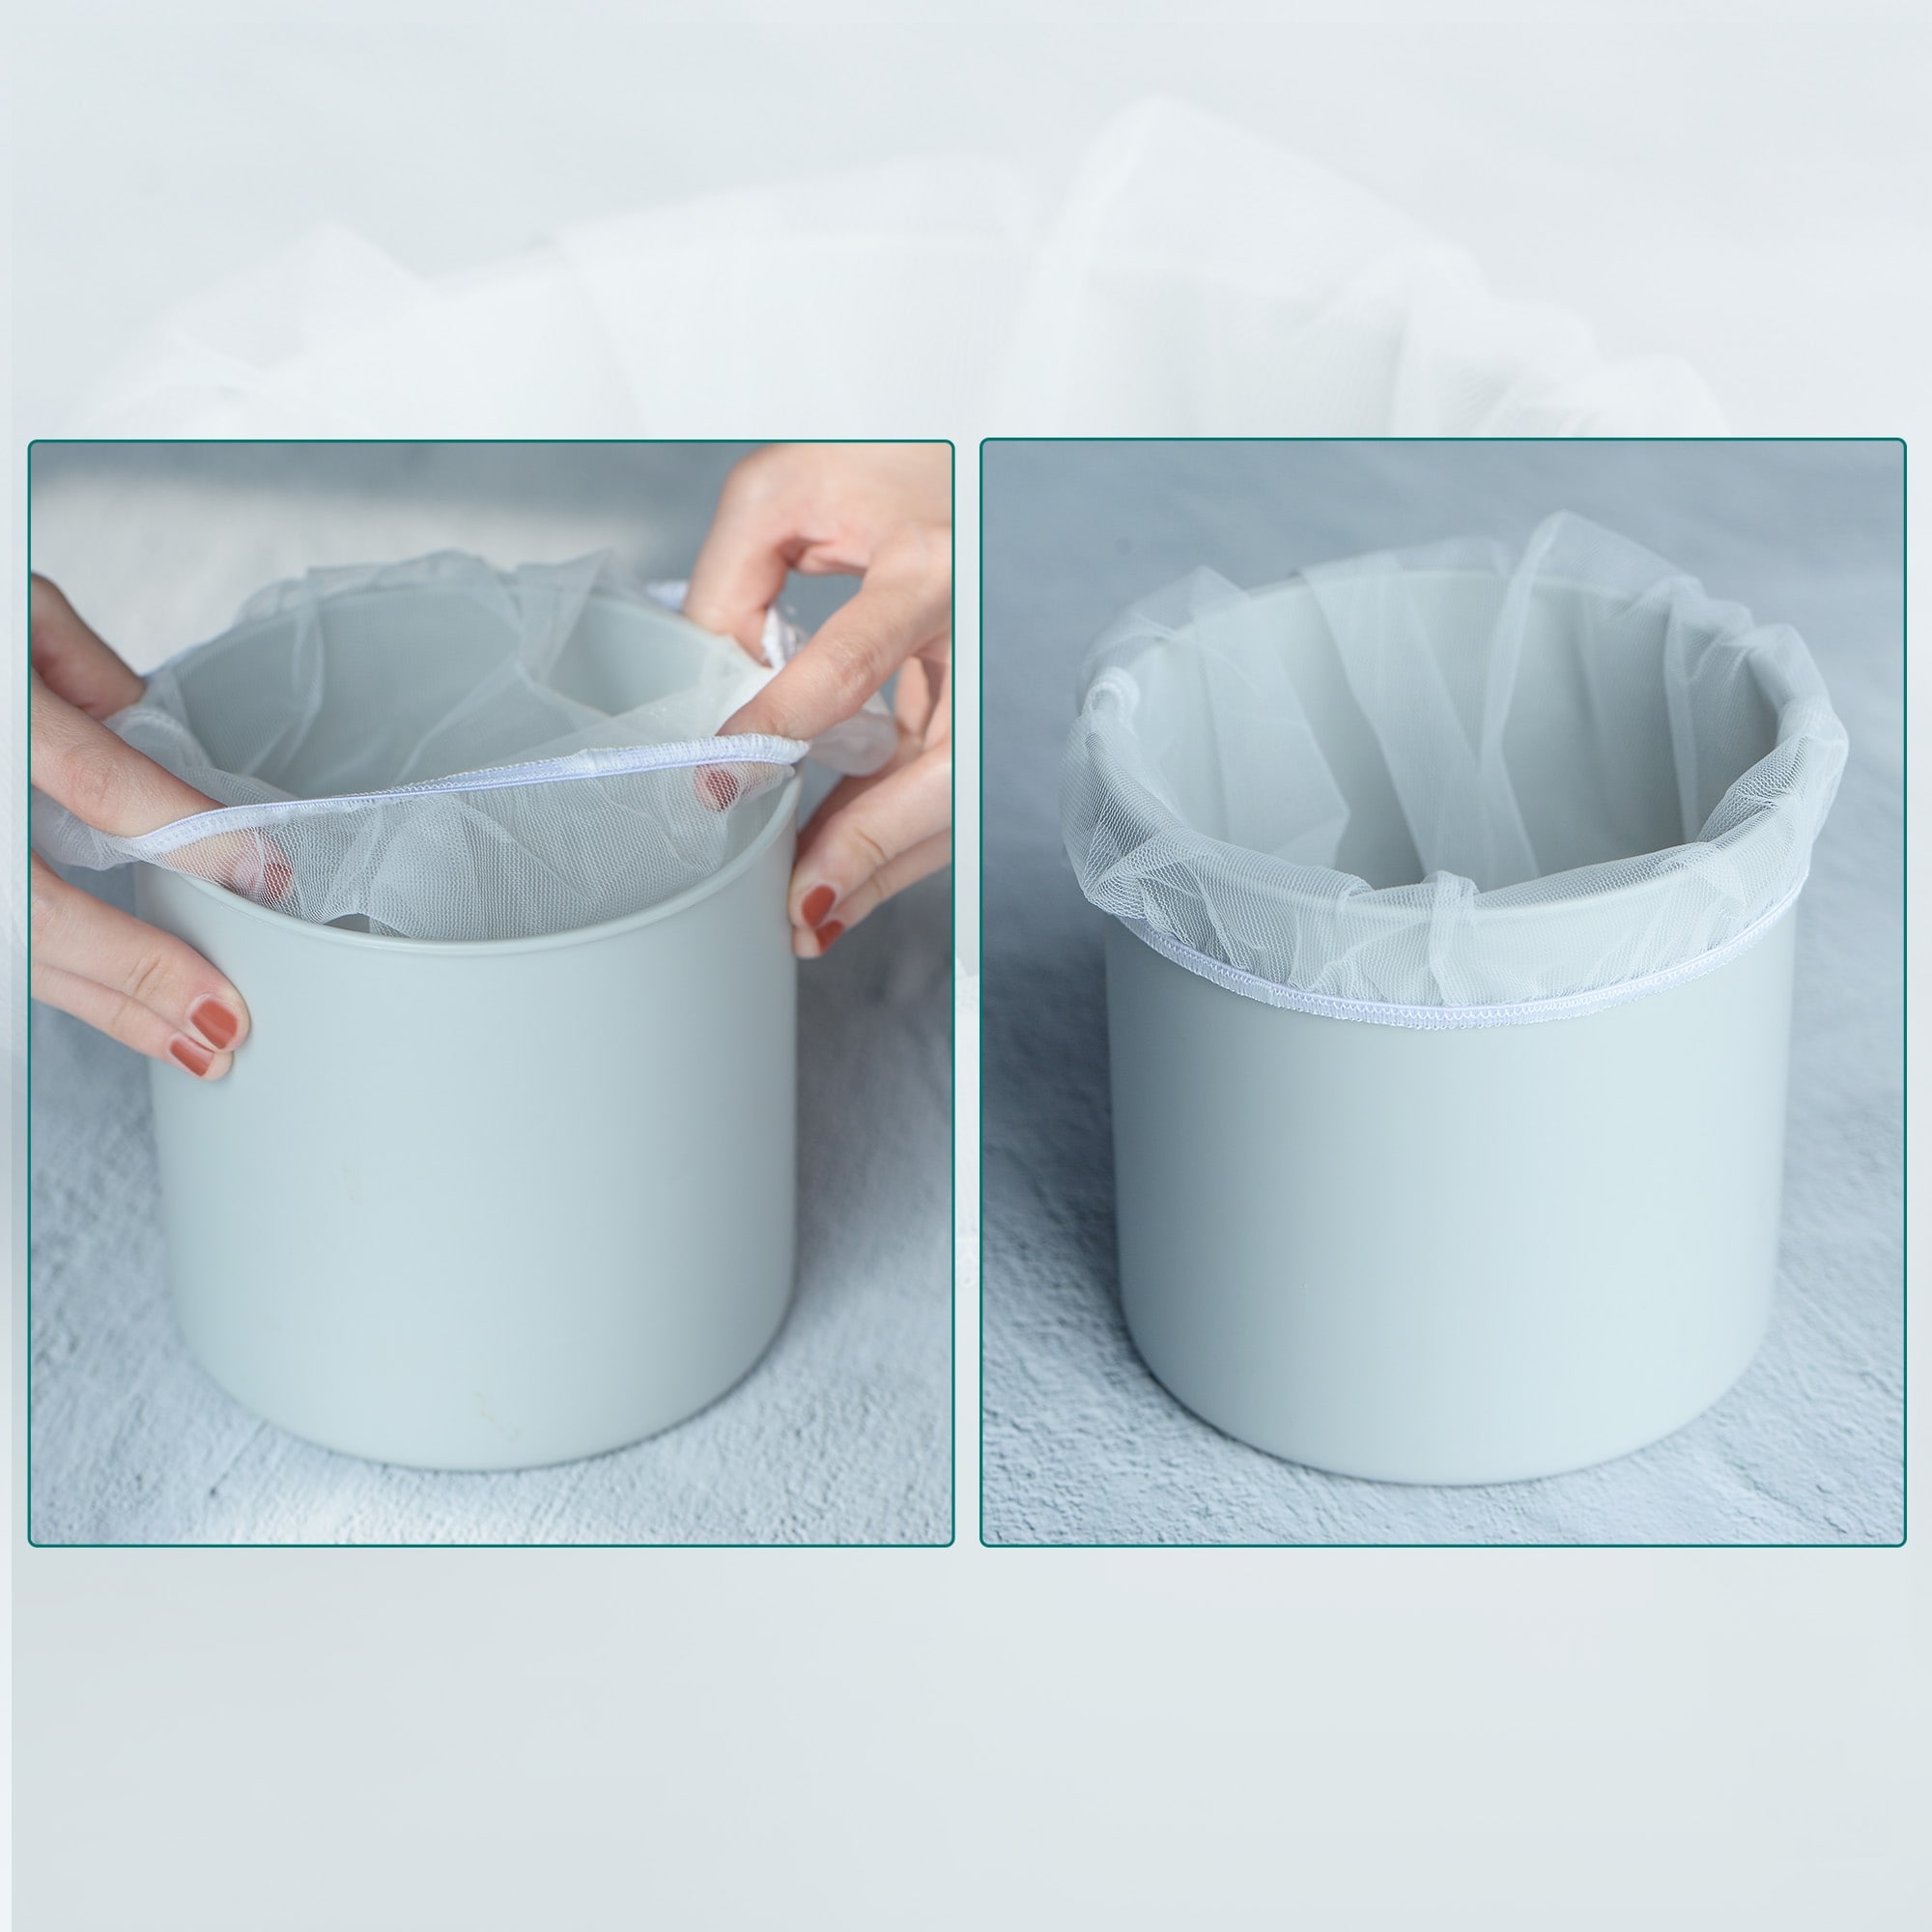 https://ak1.ostkcdn.com/images/products/is/images/direct/6f465cde1a43c4d51264aa7a119ae6f139403b01/250-Micron-Paint-Screen-Bag-with-Elastic-Opening-for-5-Gallon-Buckets-10Pcs.jpg